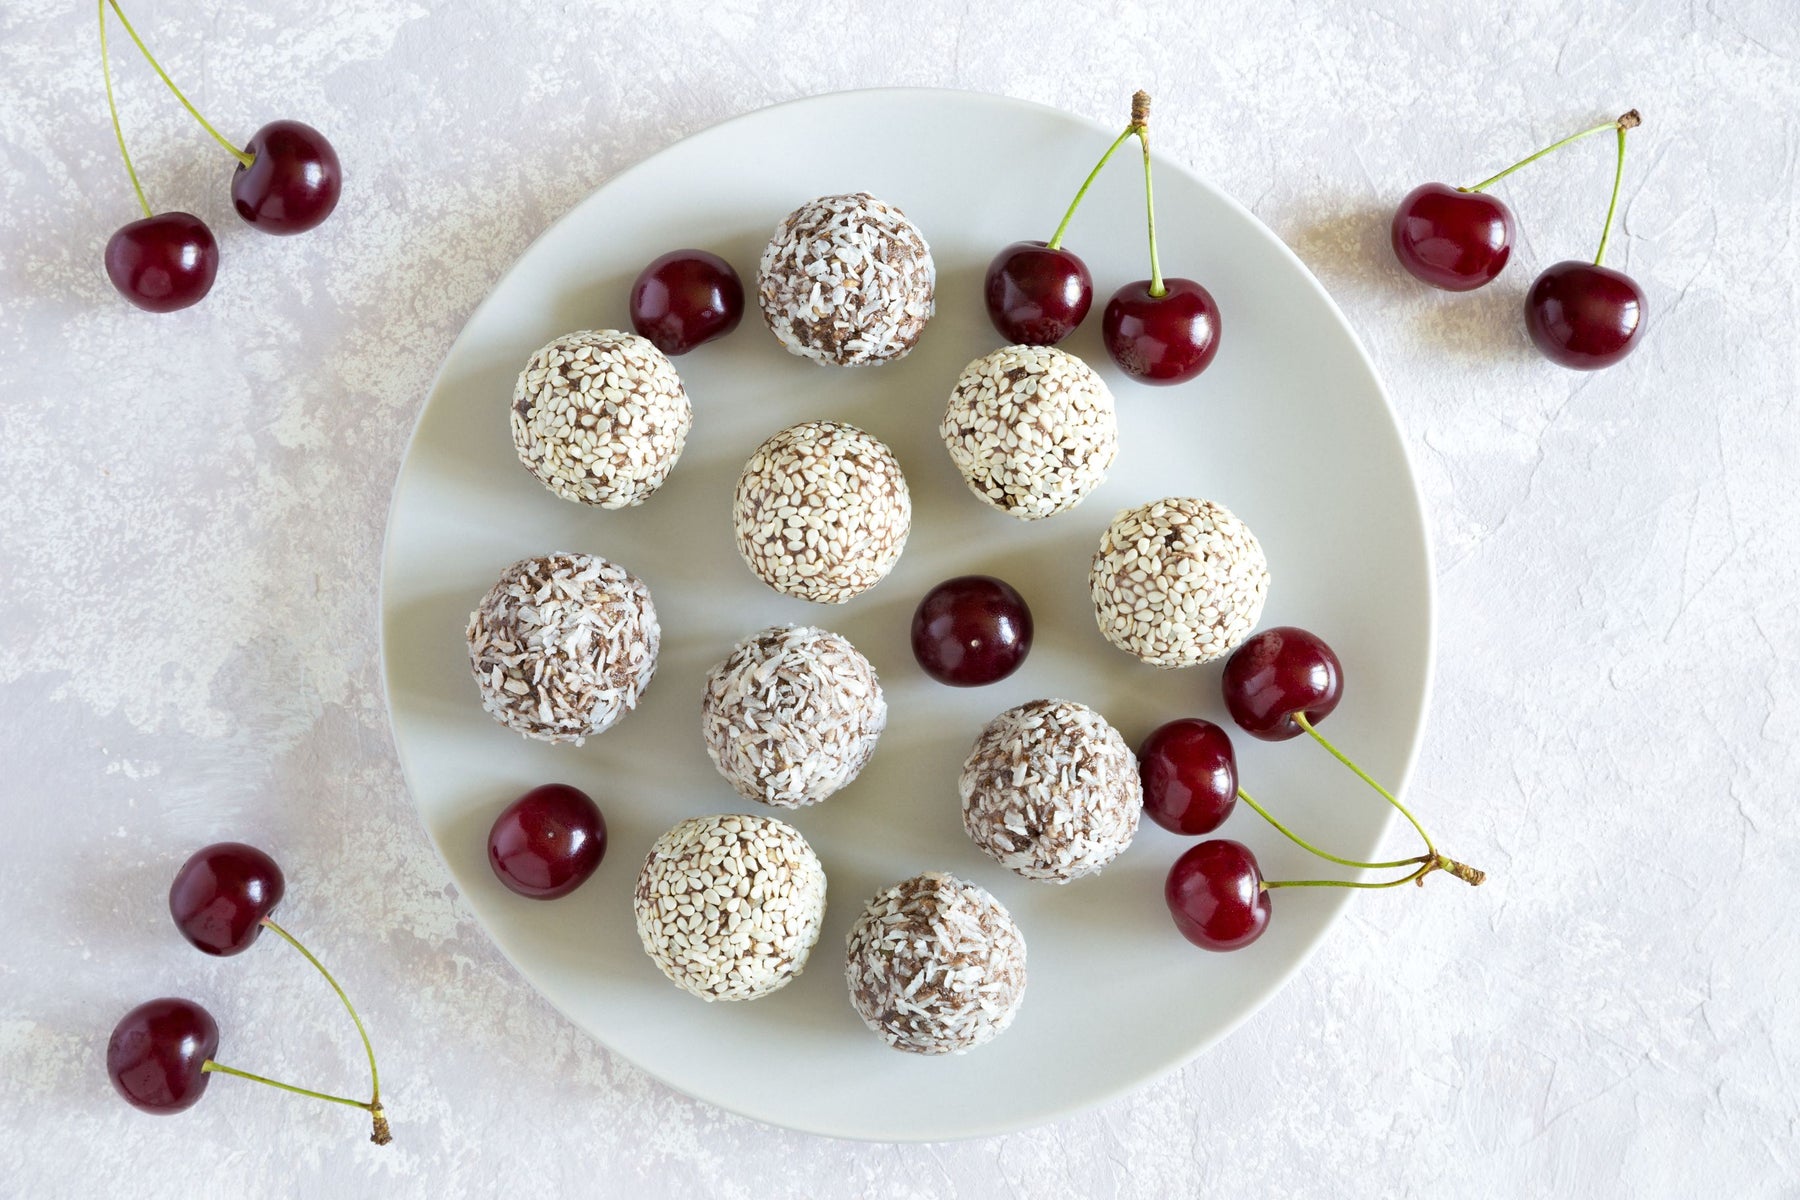 Organic Dried Sour Cherry and Oat Energy Bites: A Delicious and Healthy Snack